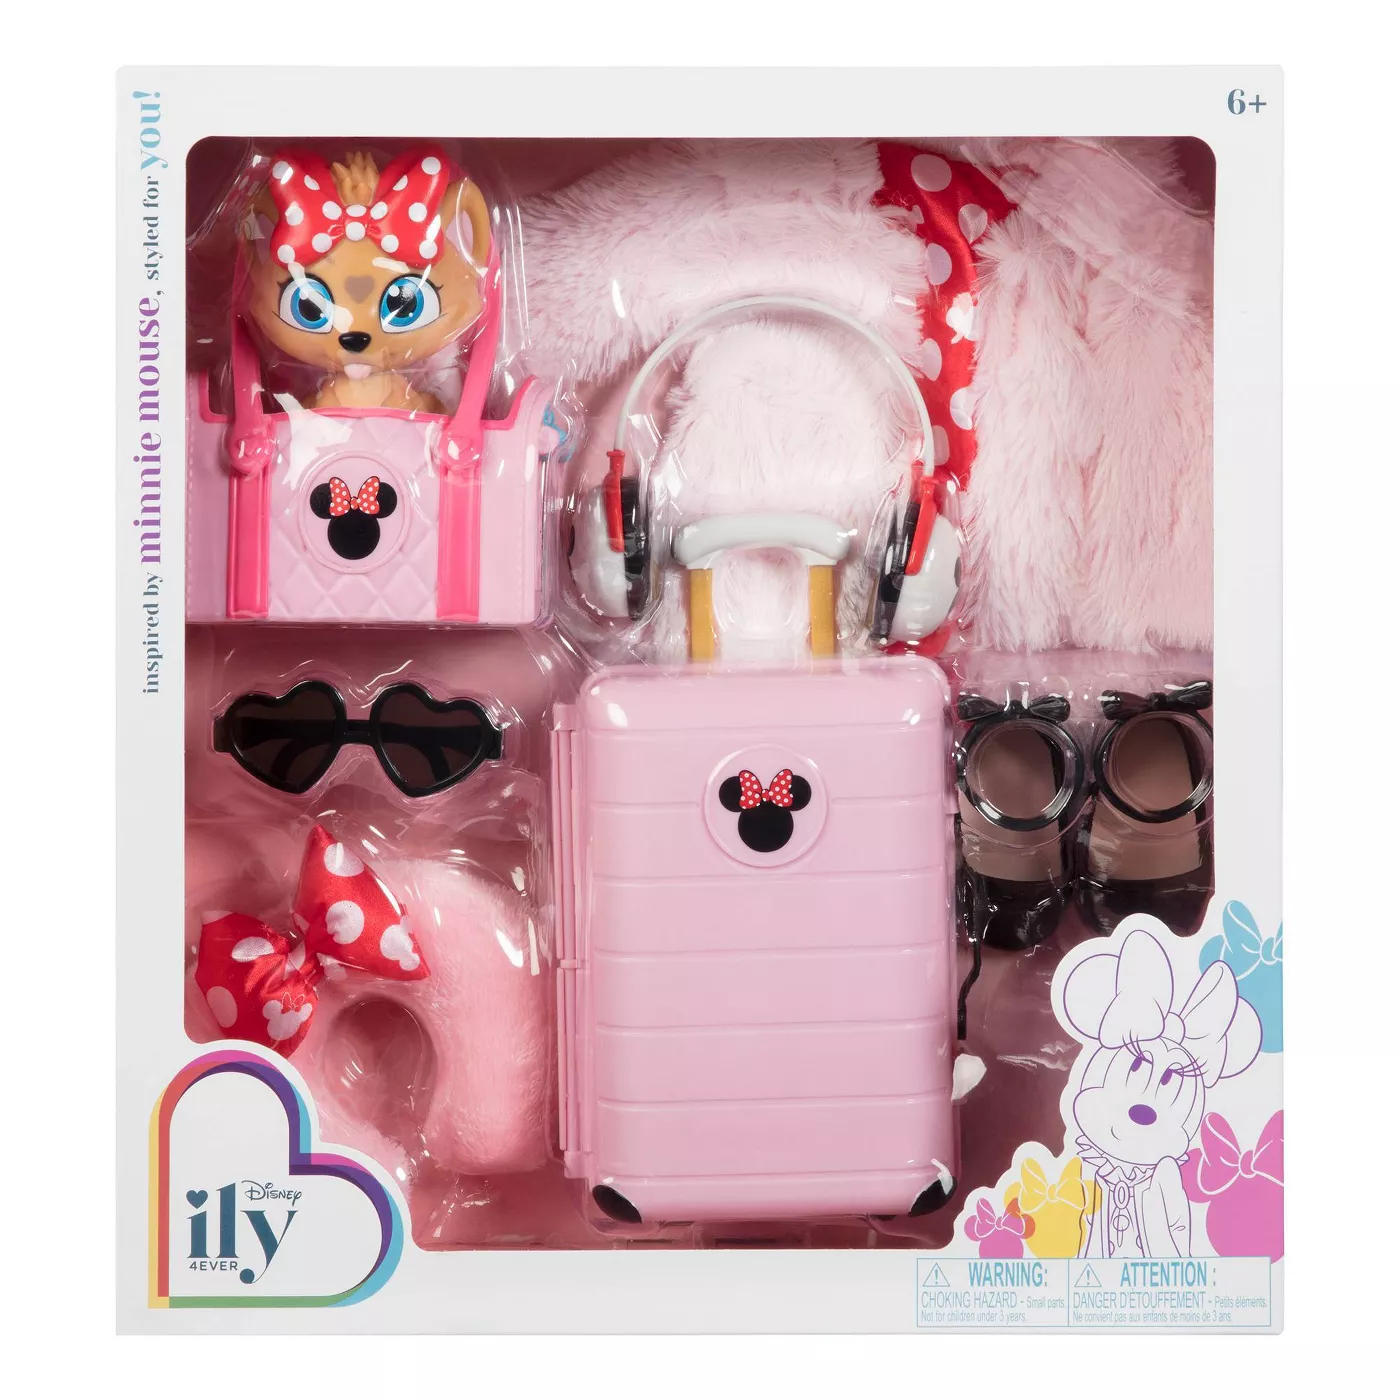 Disney ILY 4ever 18" Minnie Mouse Inspired Deluxe Fashion and Accessory Pack - image 2 of 10